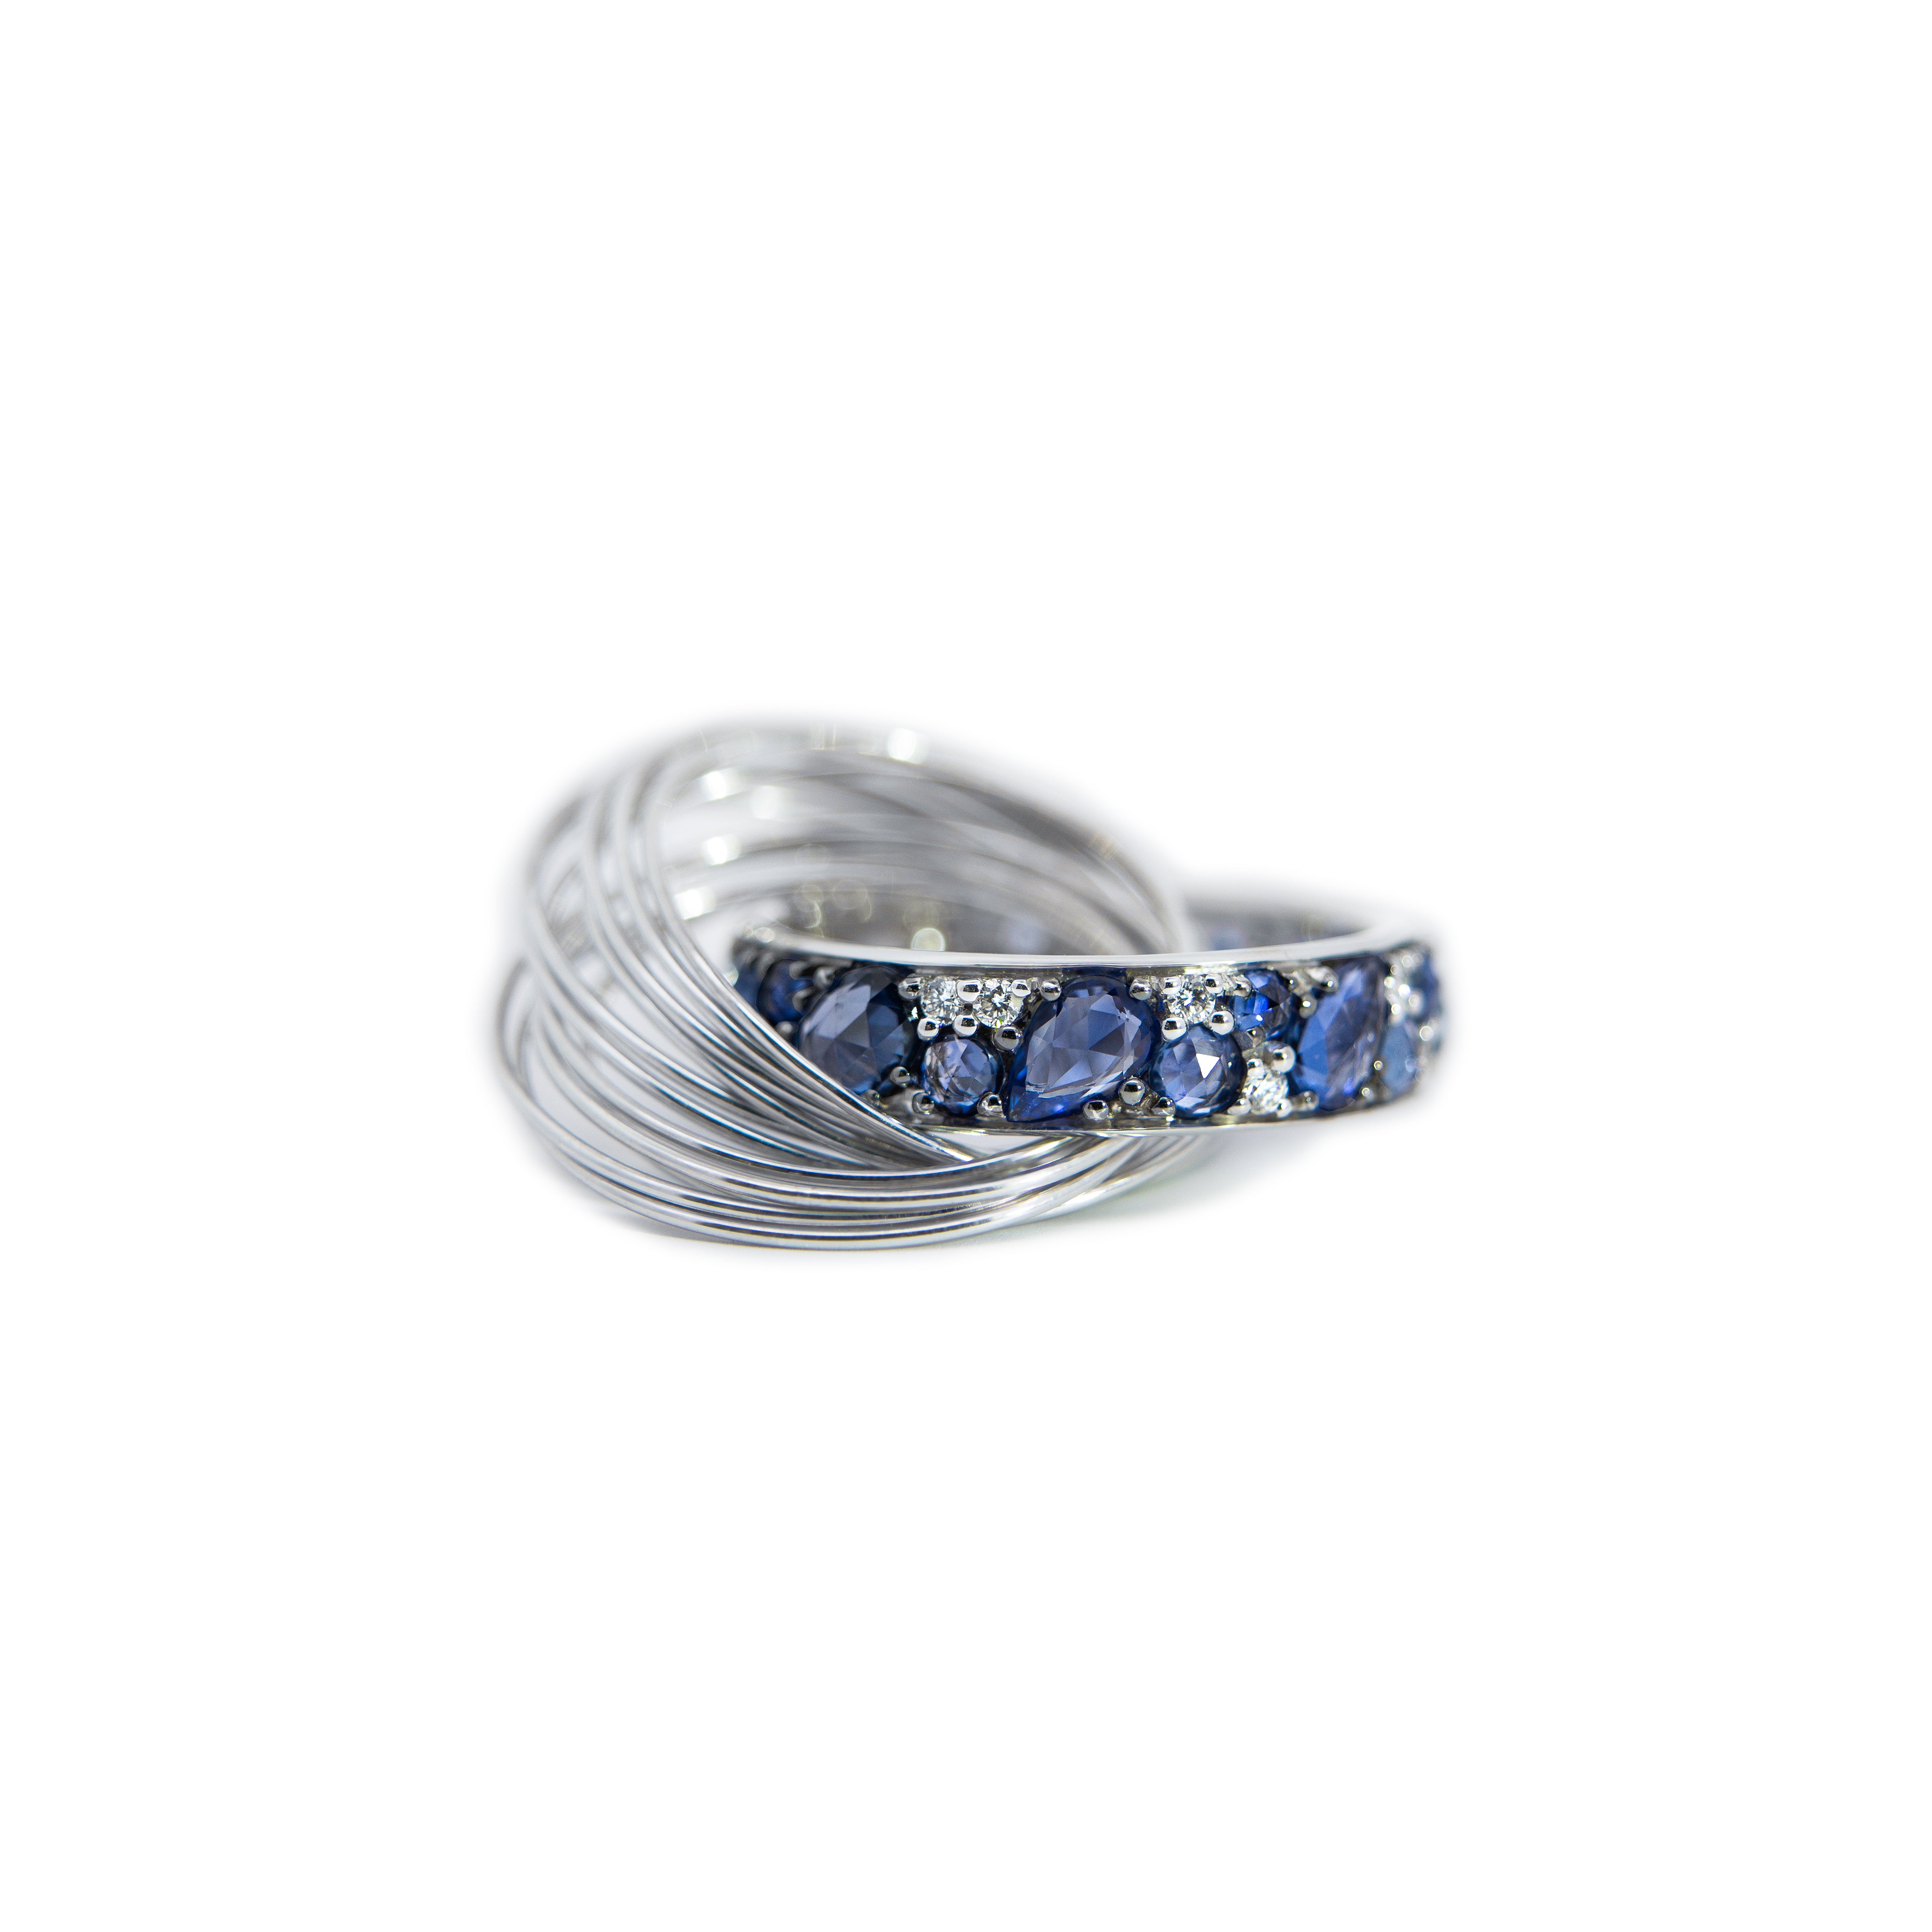 Giovanni Ferraris Ring with Sapphires